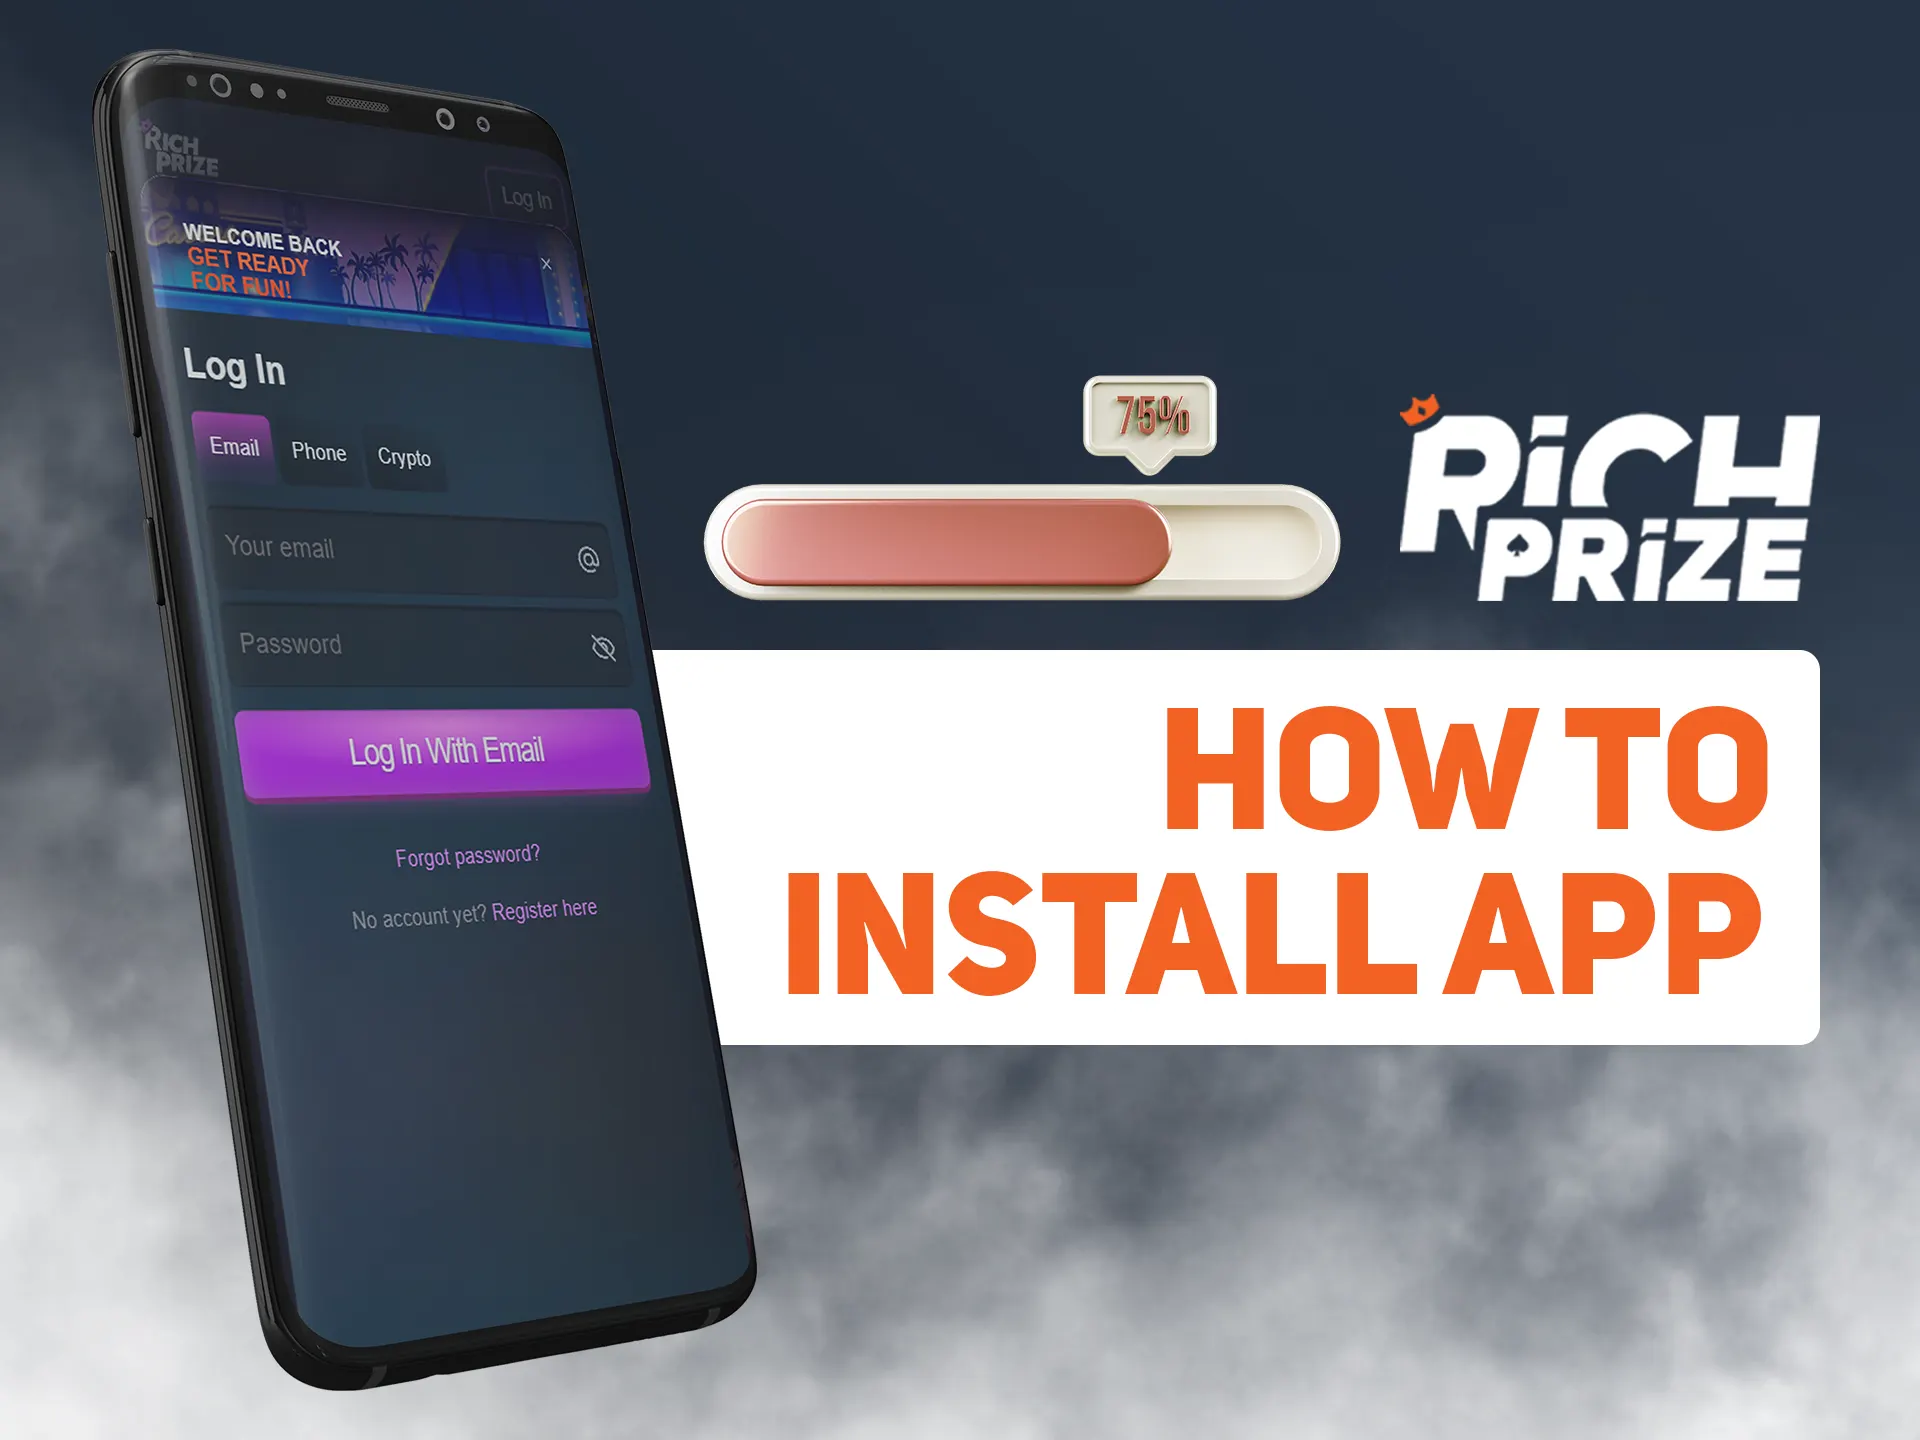 Install Richprize app in two steps.